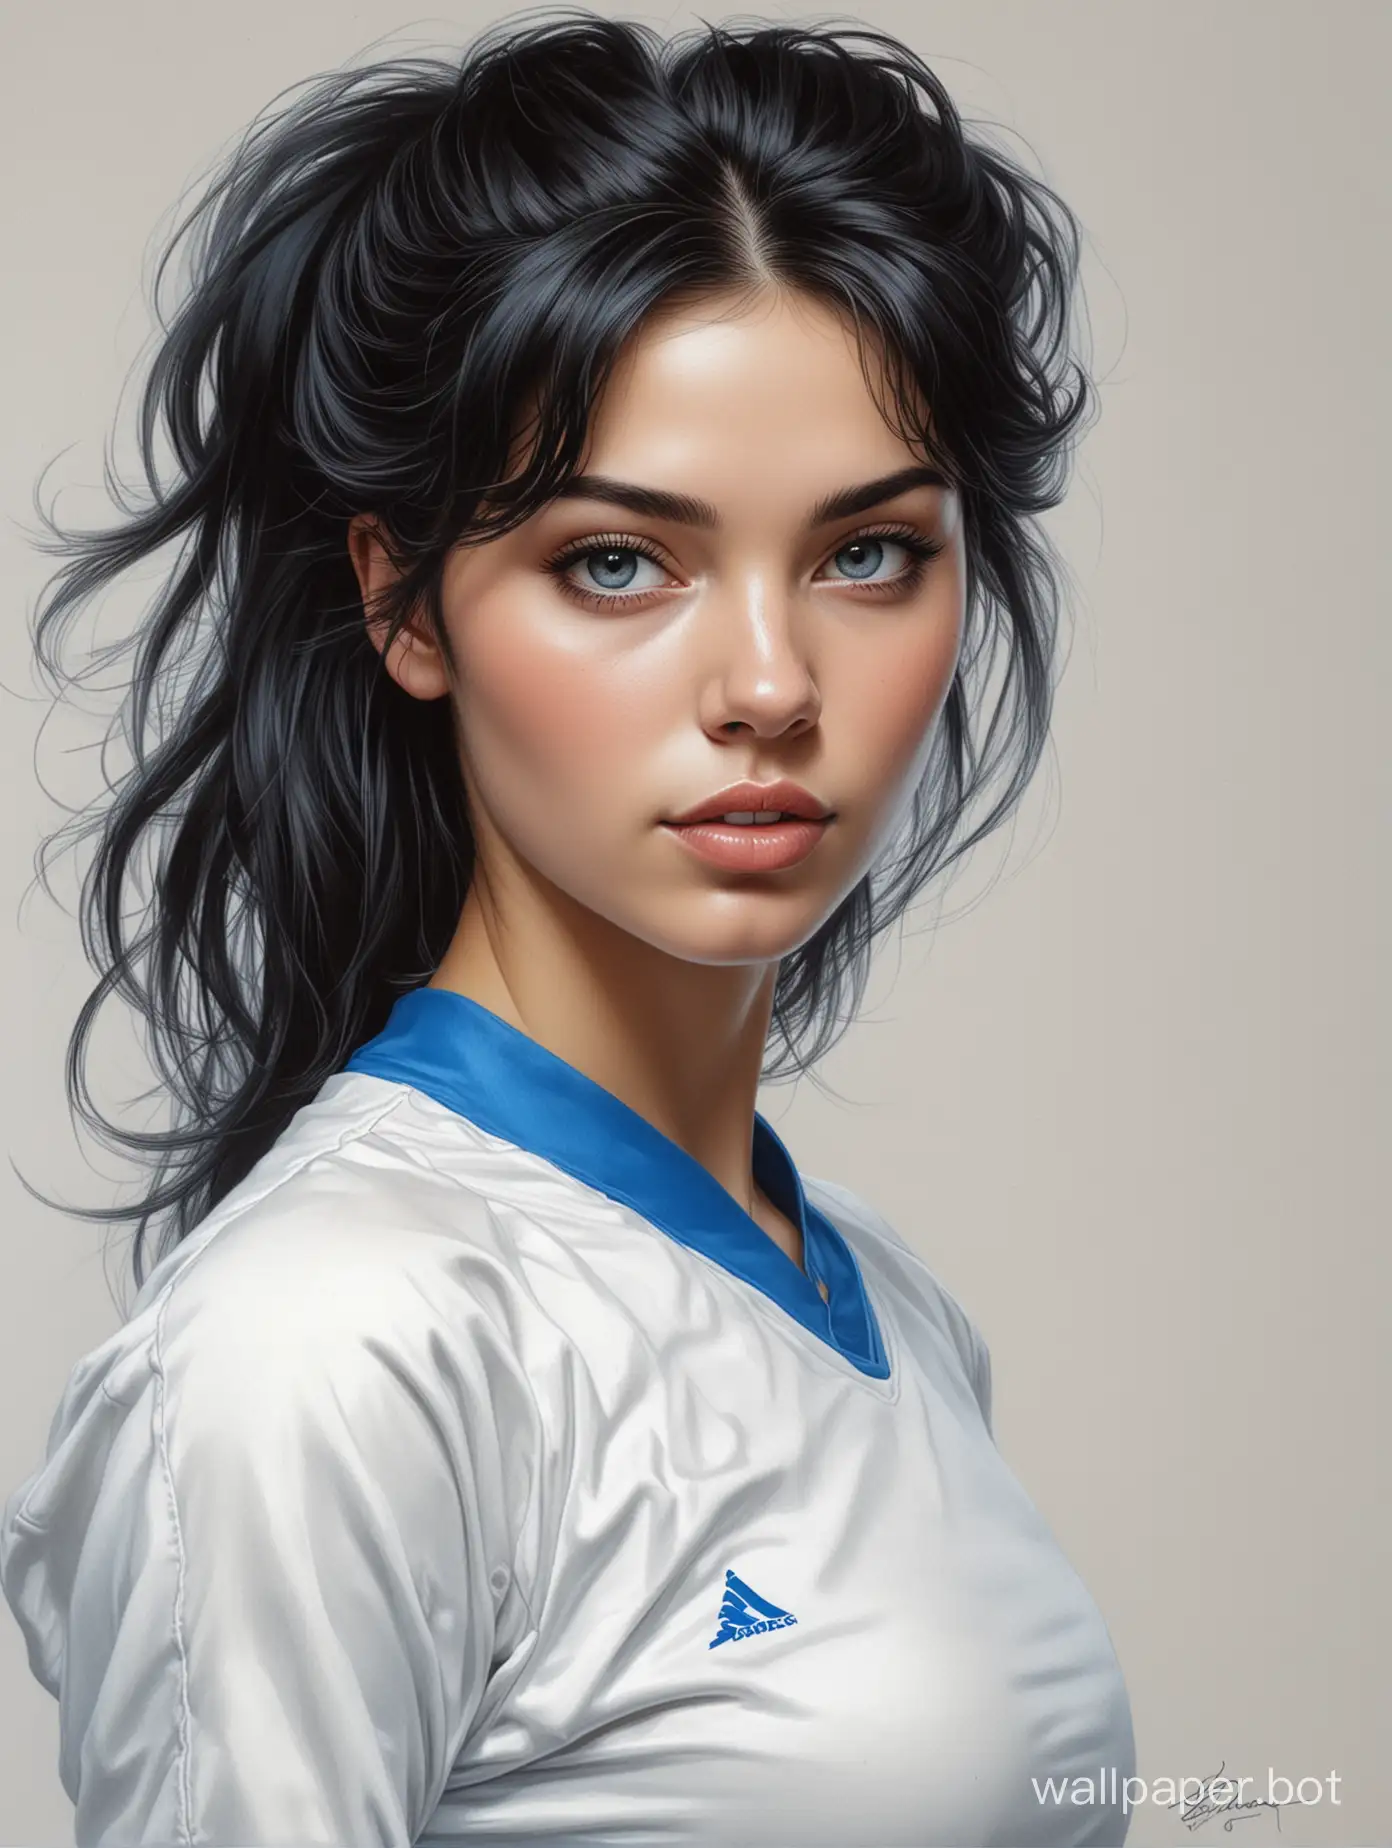 sketch young Katerina Shpitsa 18 years old black hair 5 breast size narrow waist In white-blue soccer form white background high realism drawing with liner portrait in half-turn style Boris Vallejo